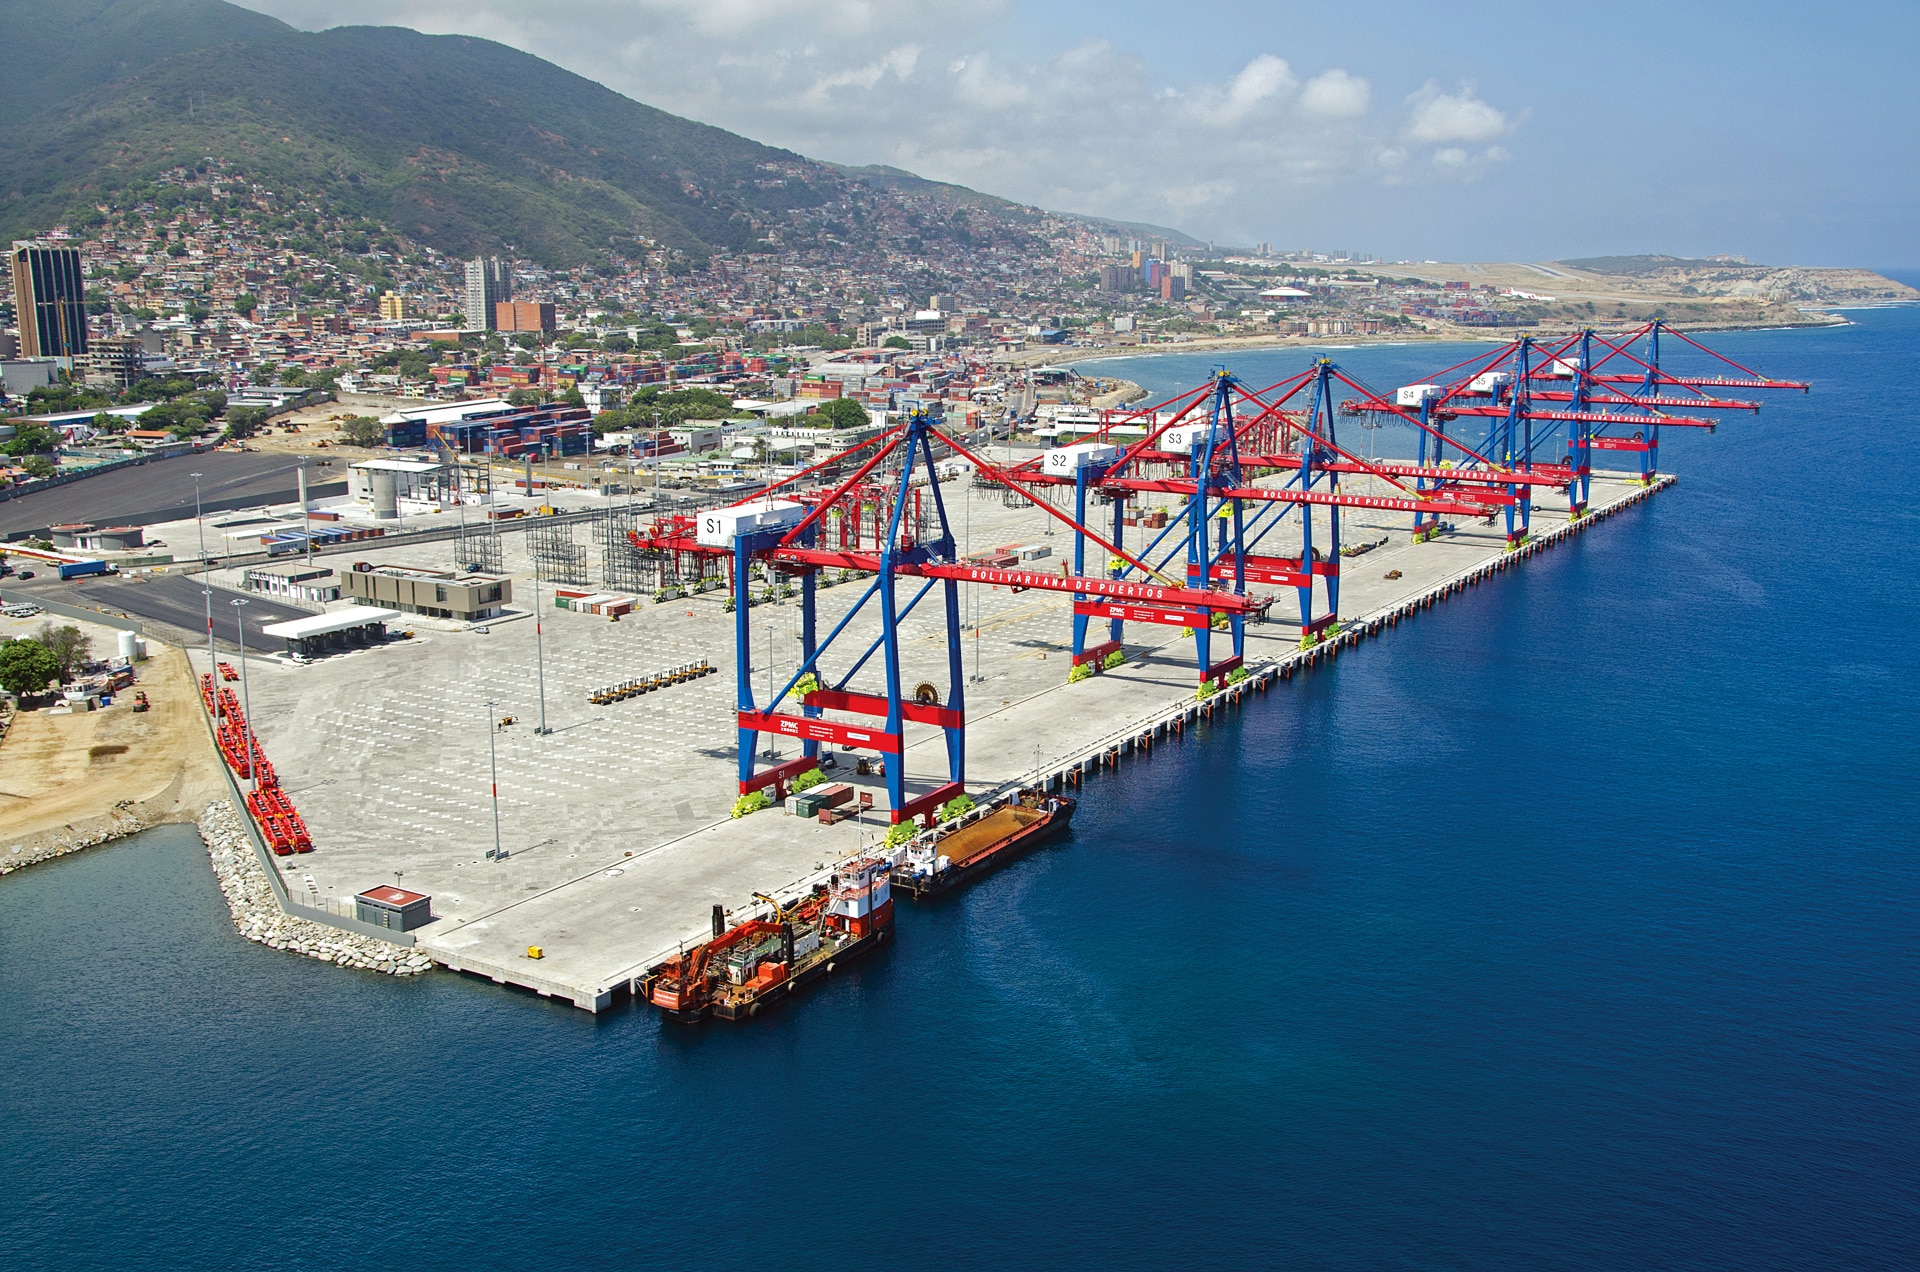 A view of Venezuela's La Guaira port, the largest and most active point of international trade in the country. Photo: Teixeira Duarte.